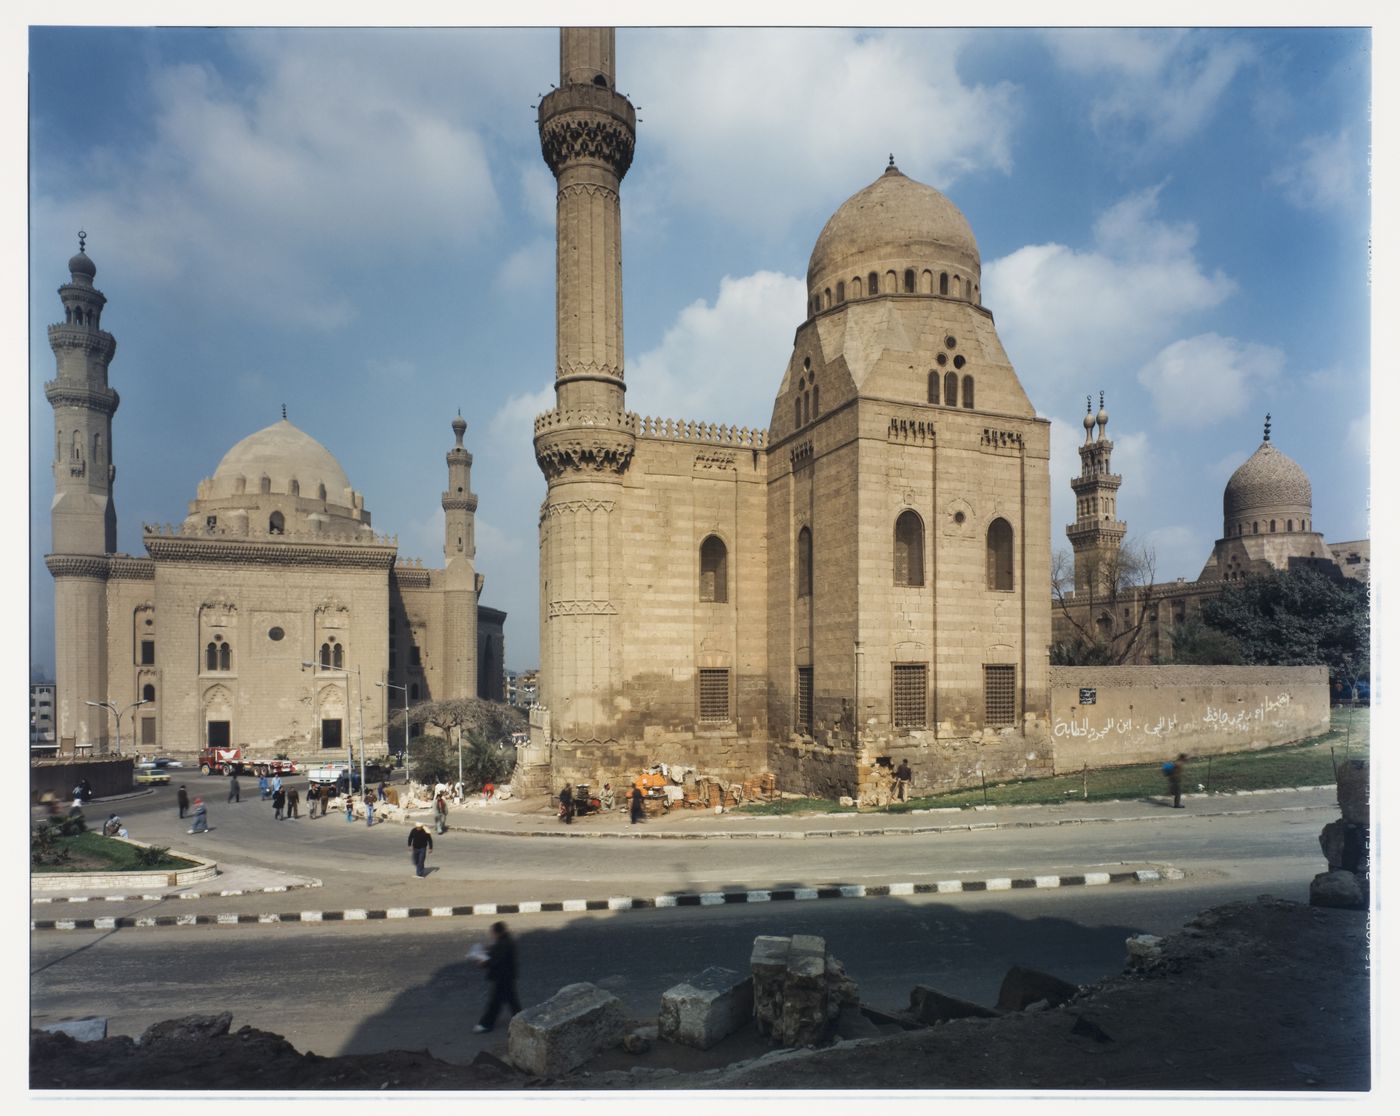 View of Sultan Hassan (on left) from the Citadel across several streets, Cairo, Egypt